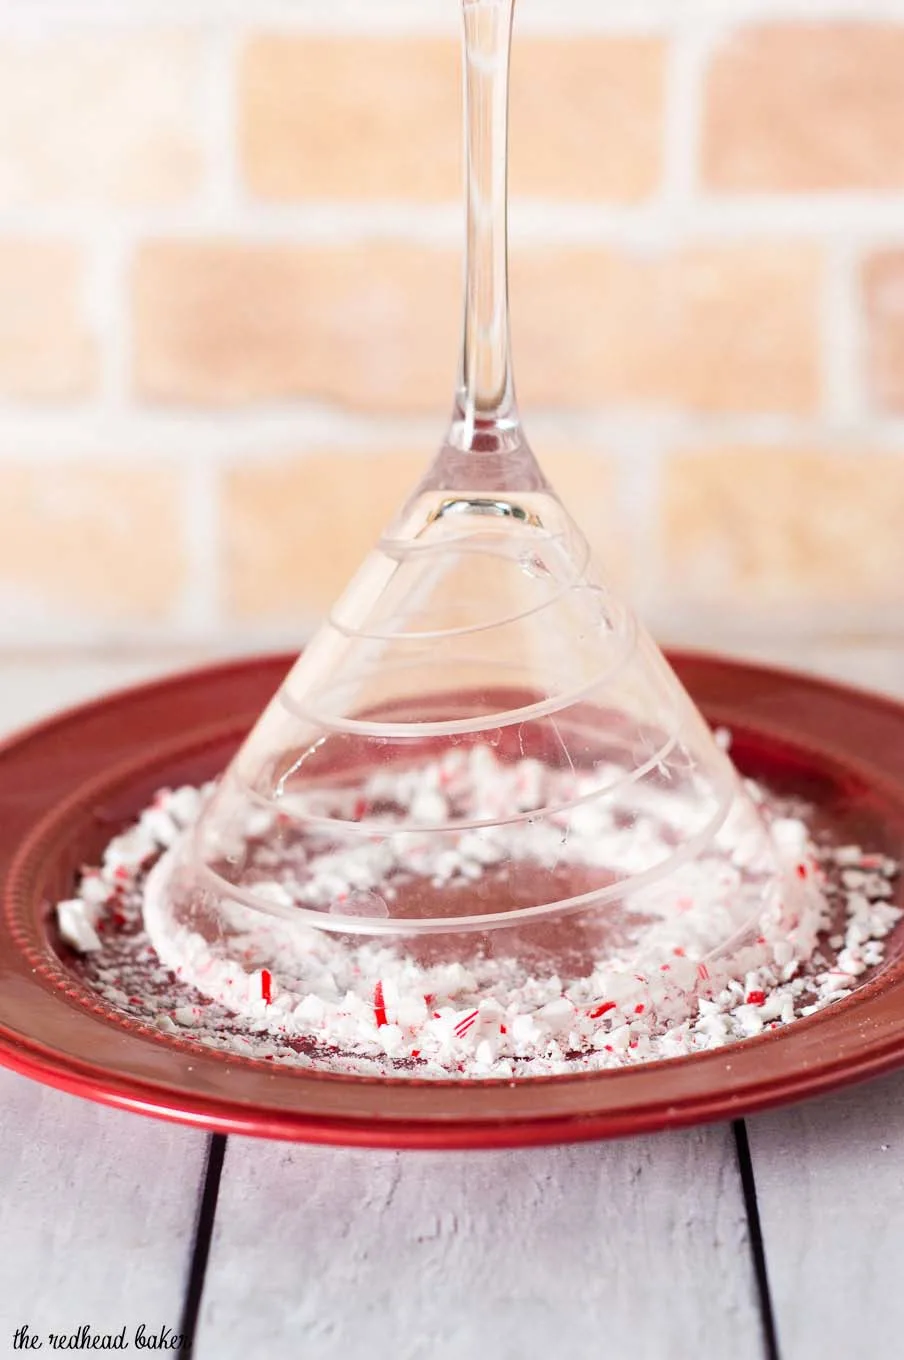 It doesn't get more festive than a candy cane martini for the holidays! Shake up a batch of this creamy cocktail for your holiday party. #ProgressiveEats